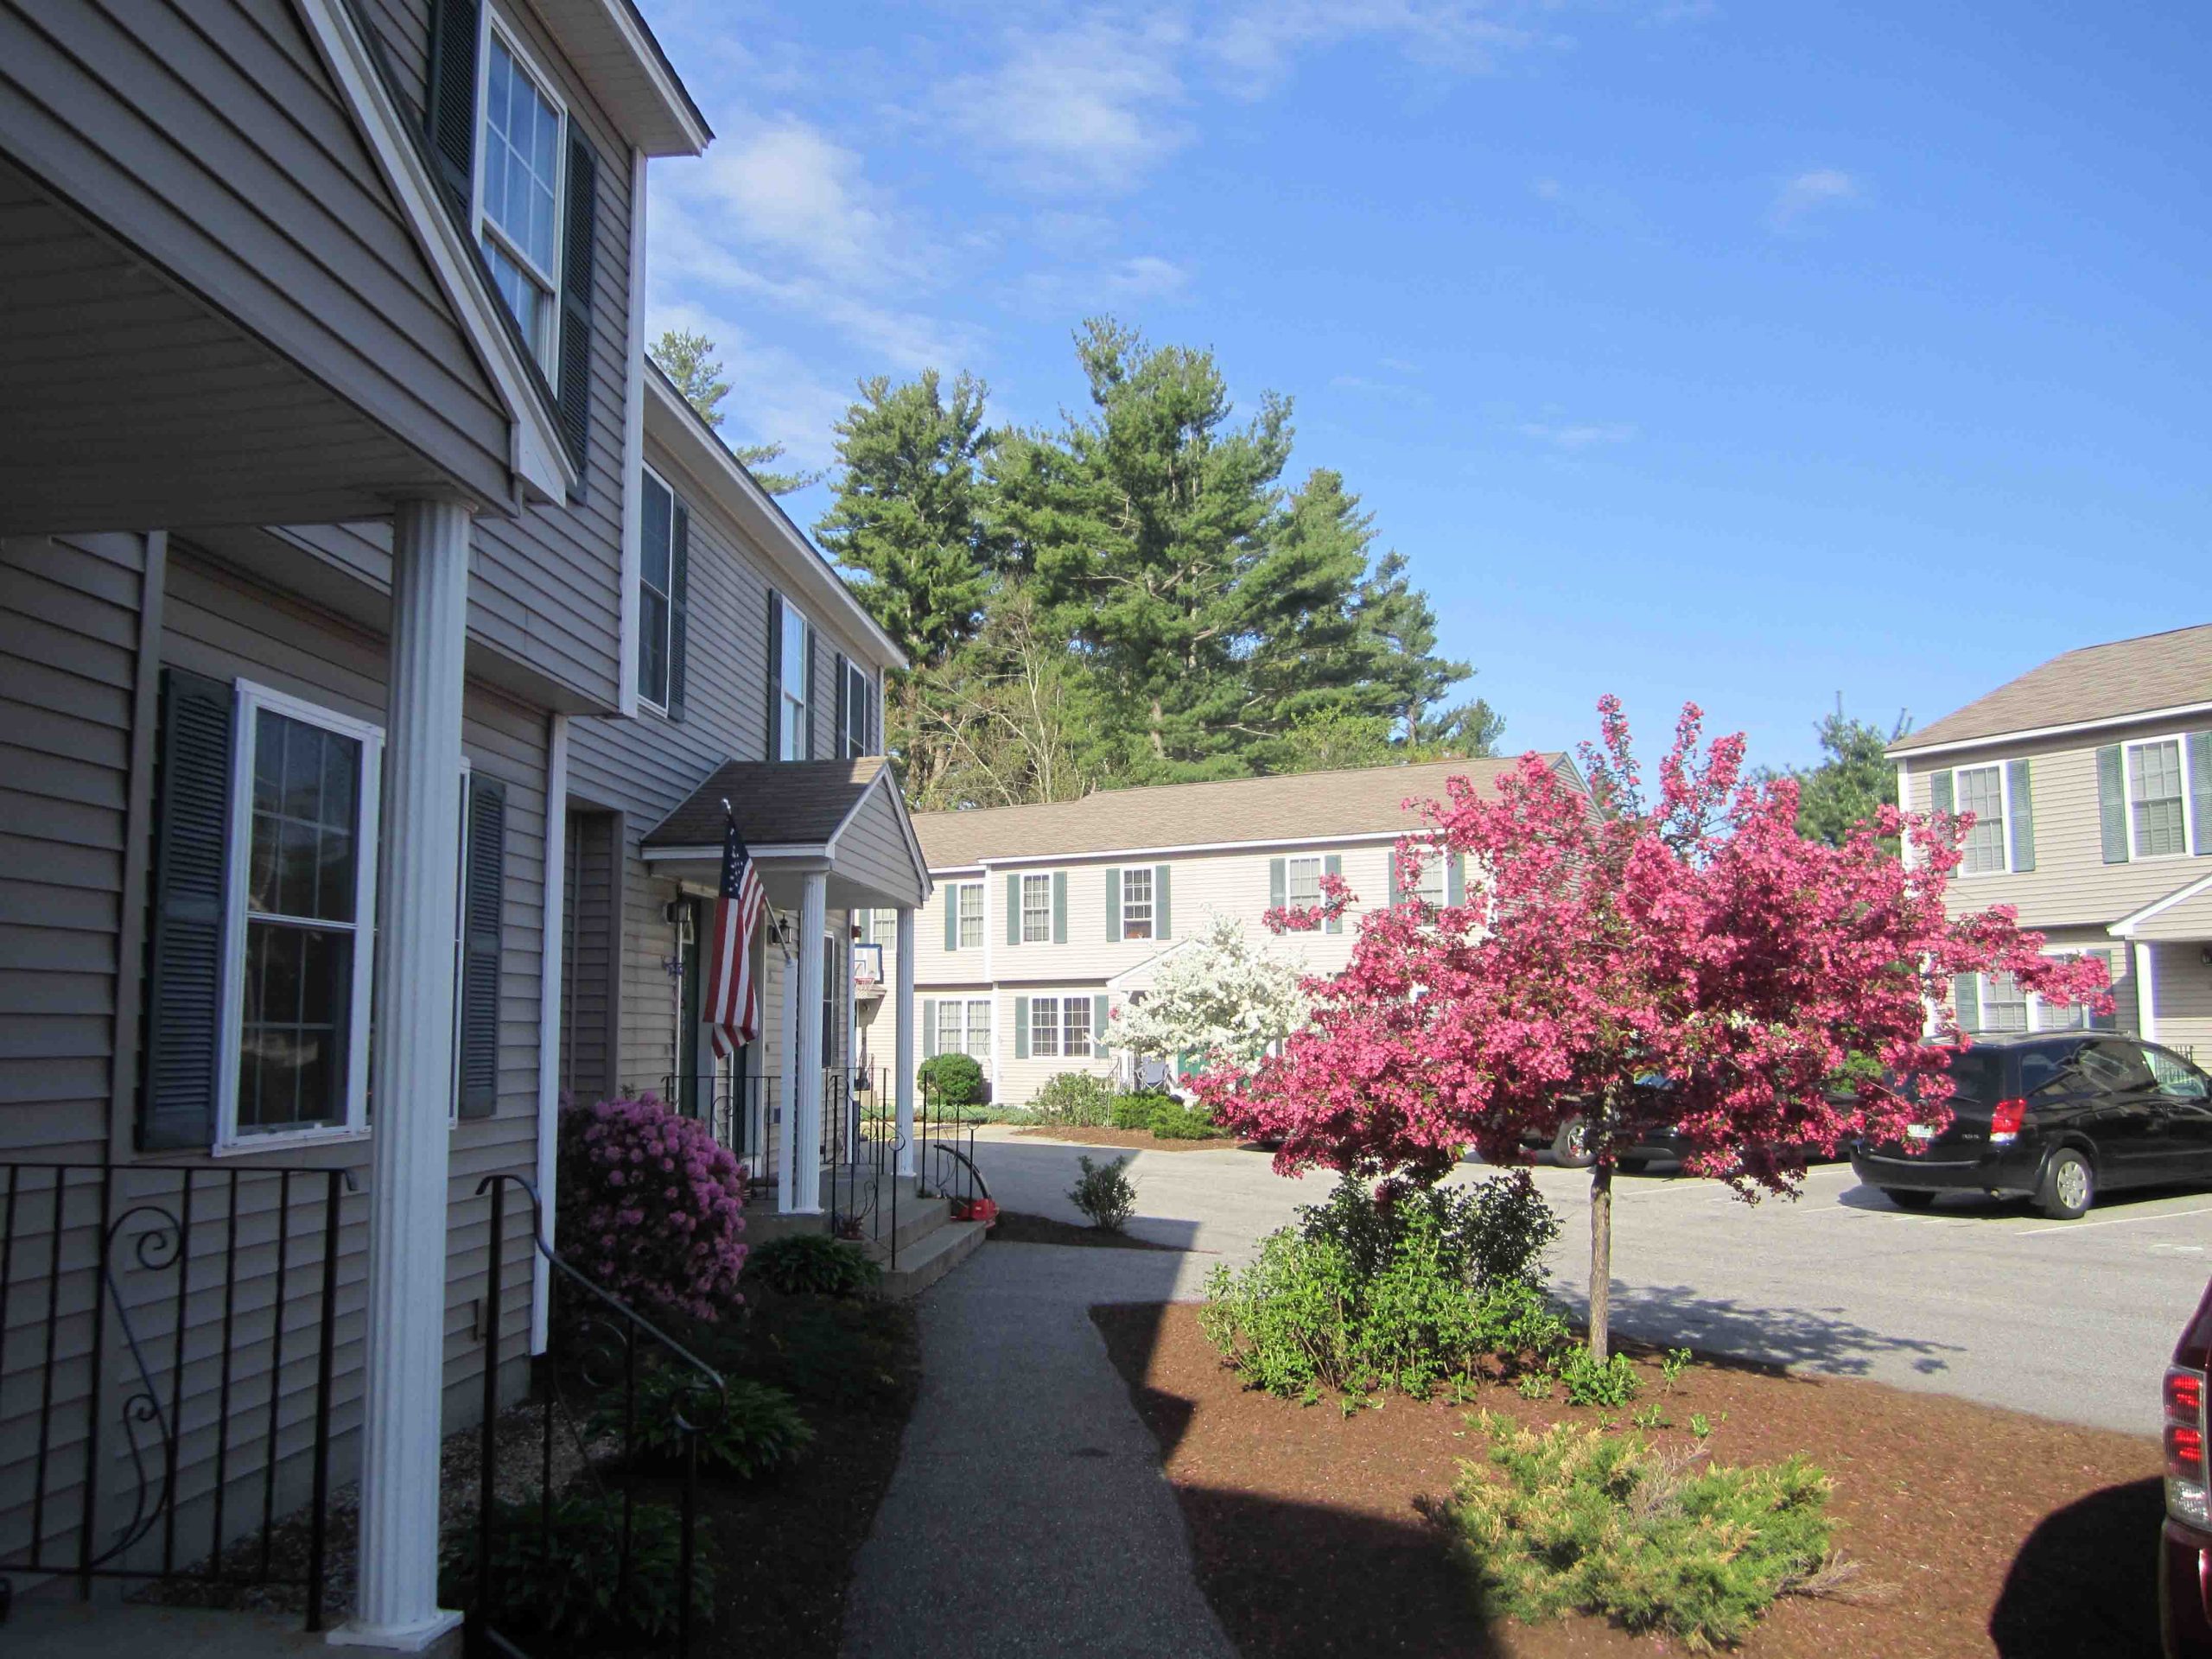 Cohas Overlook community exterior by Socha Companies is a quality townhouse community in Manchester, NH